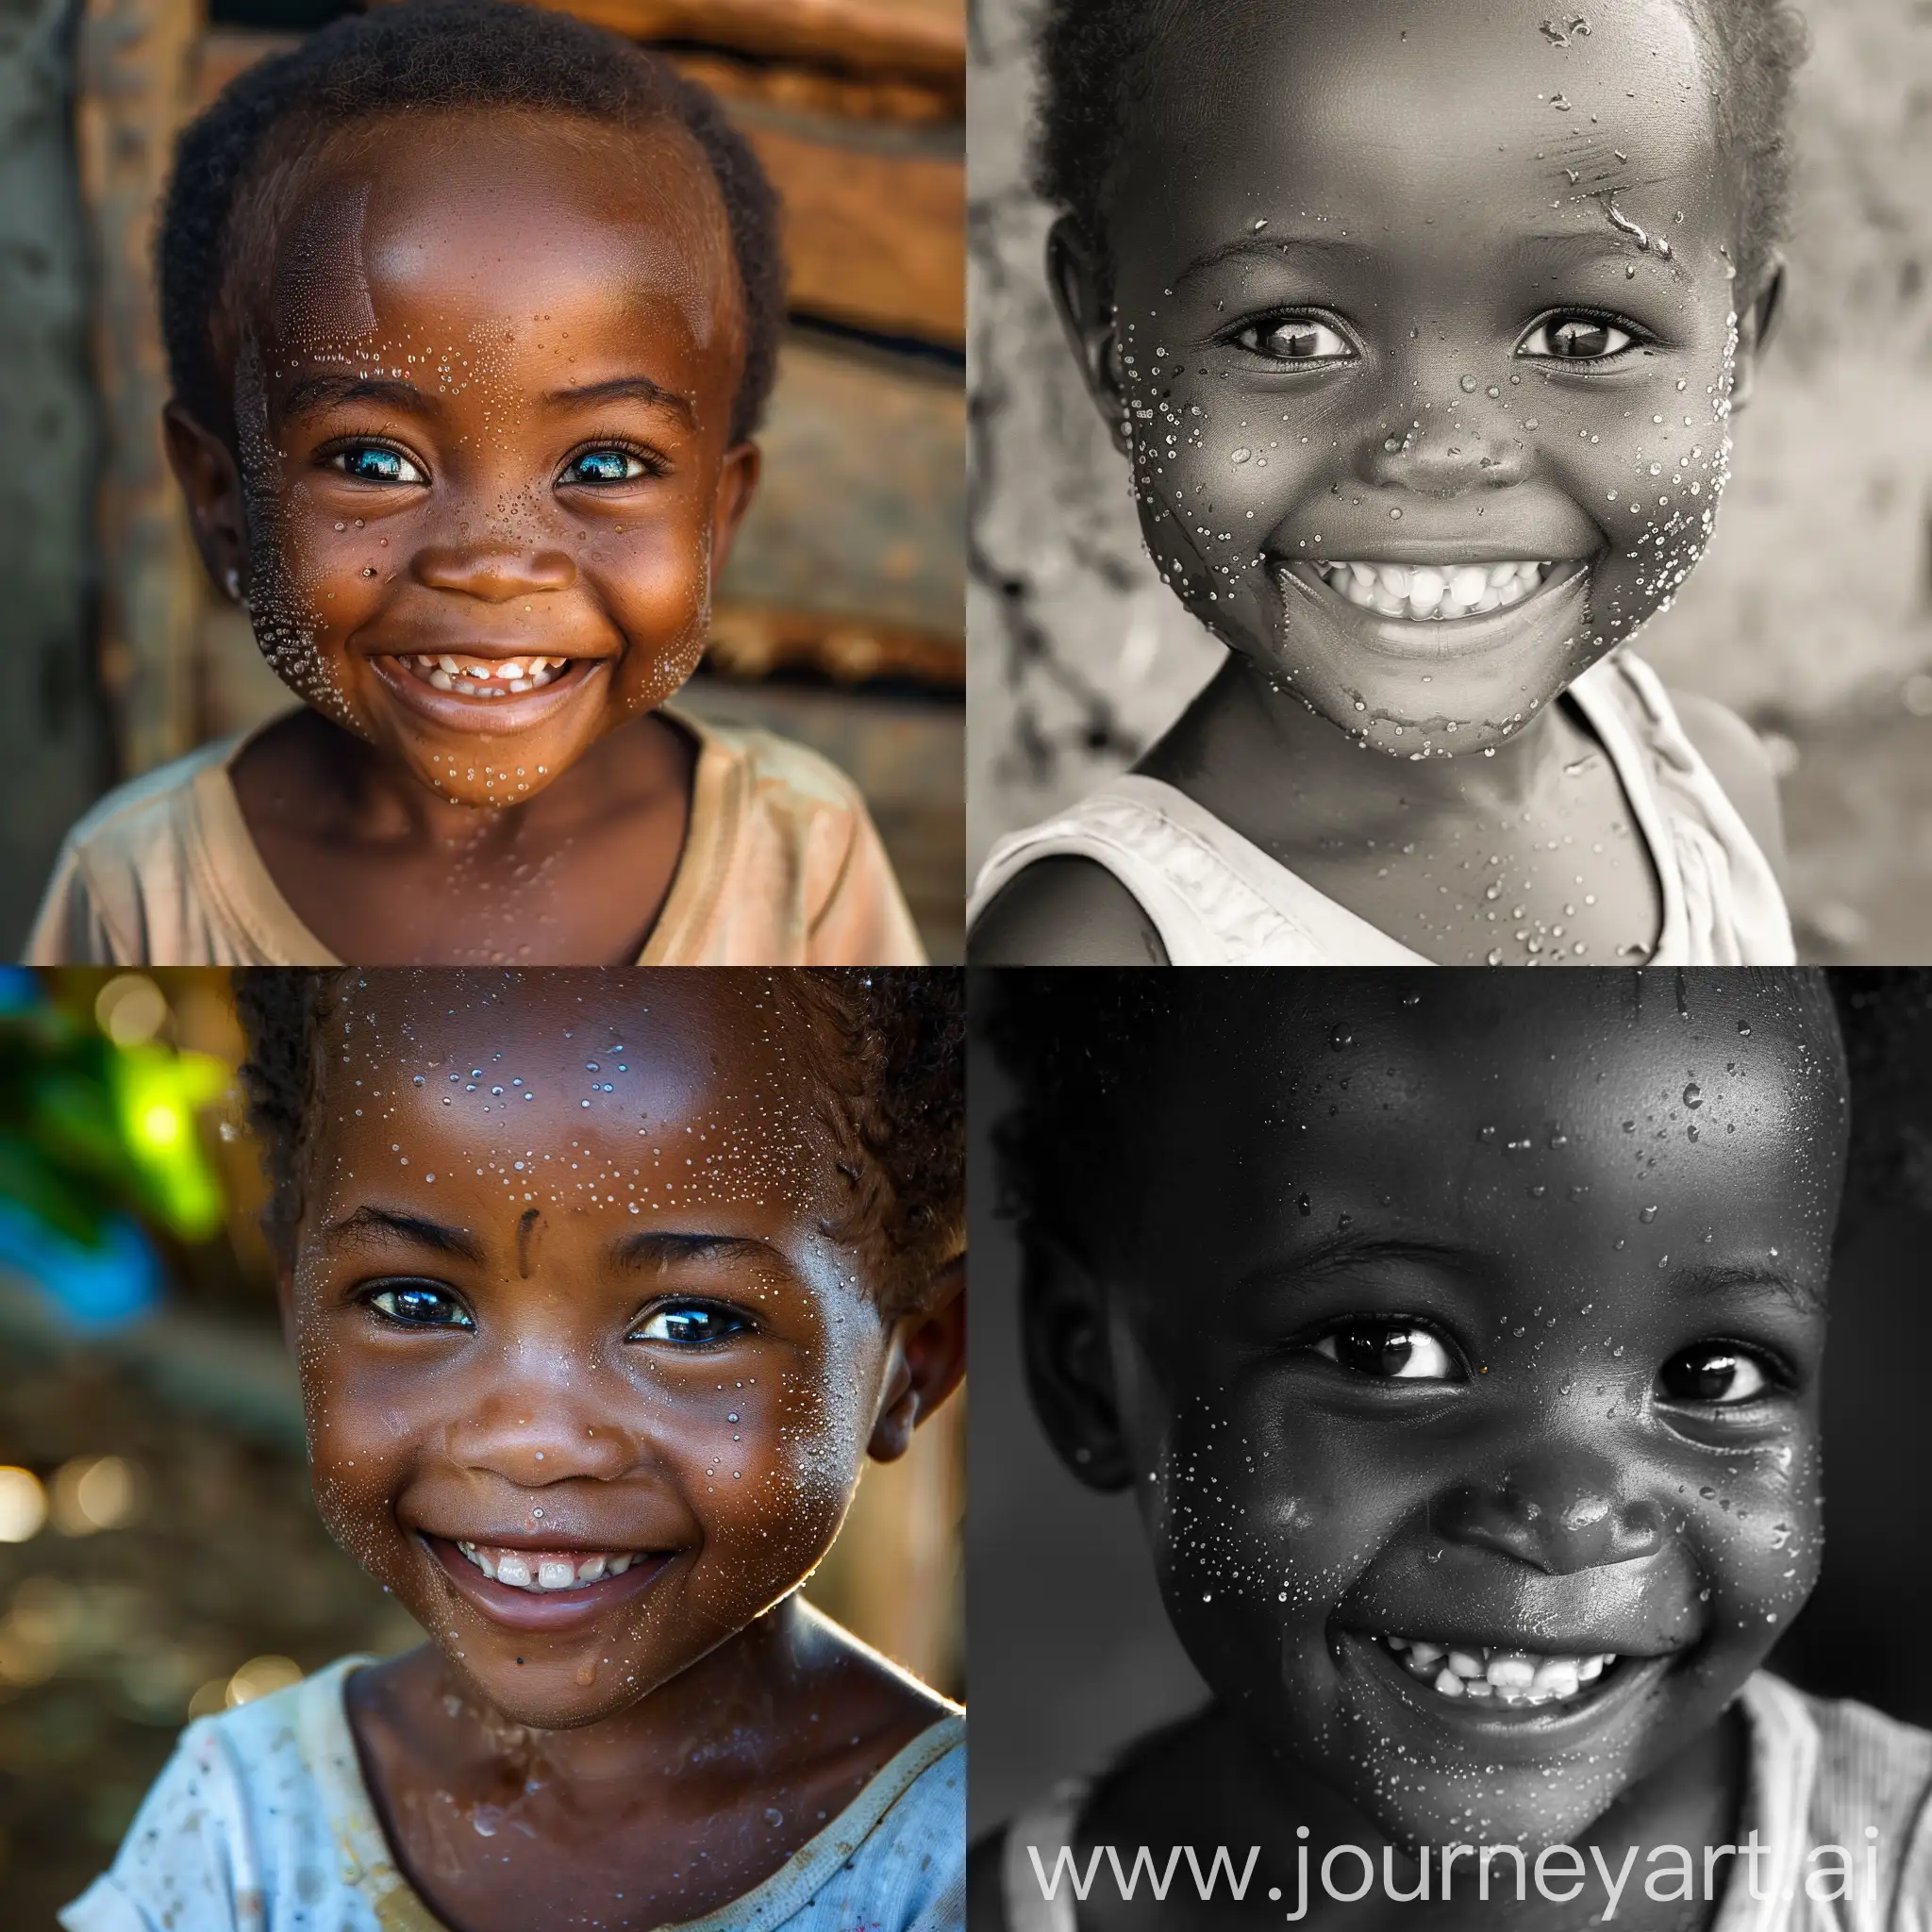 African little girl with dimples smiling. She has sweat droplets on her face. 